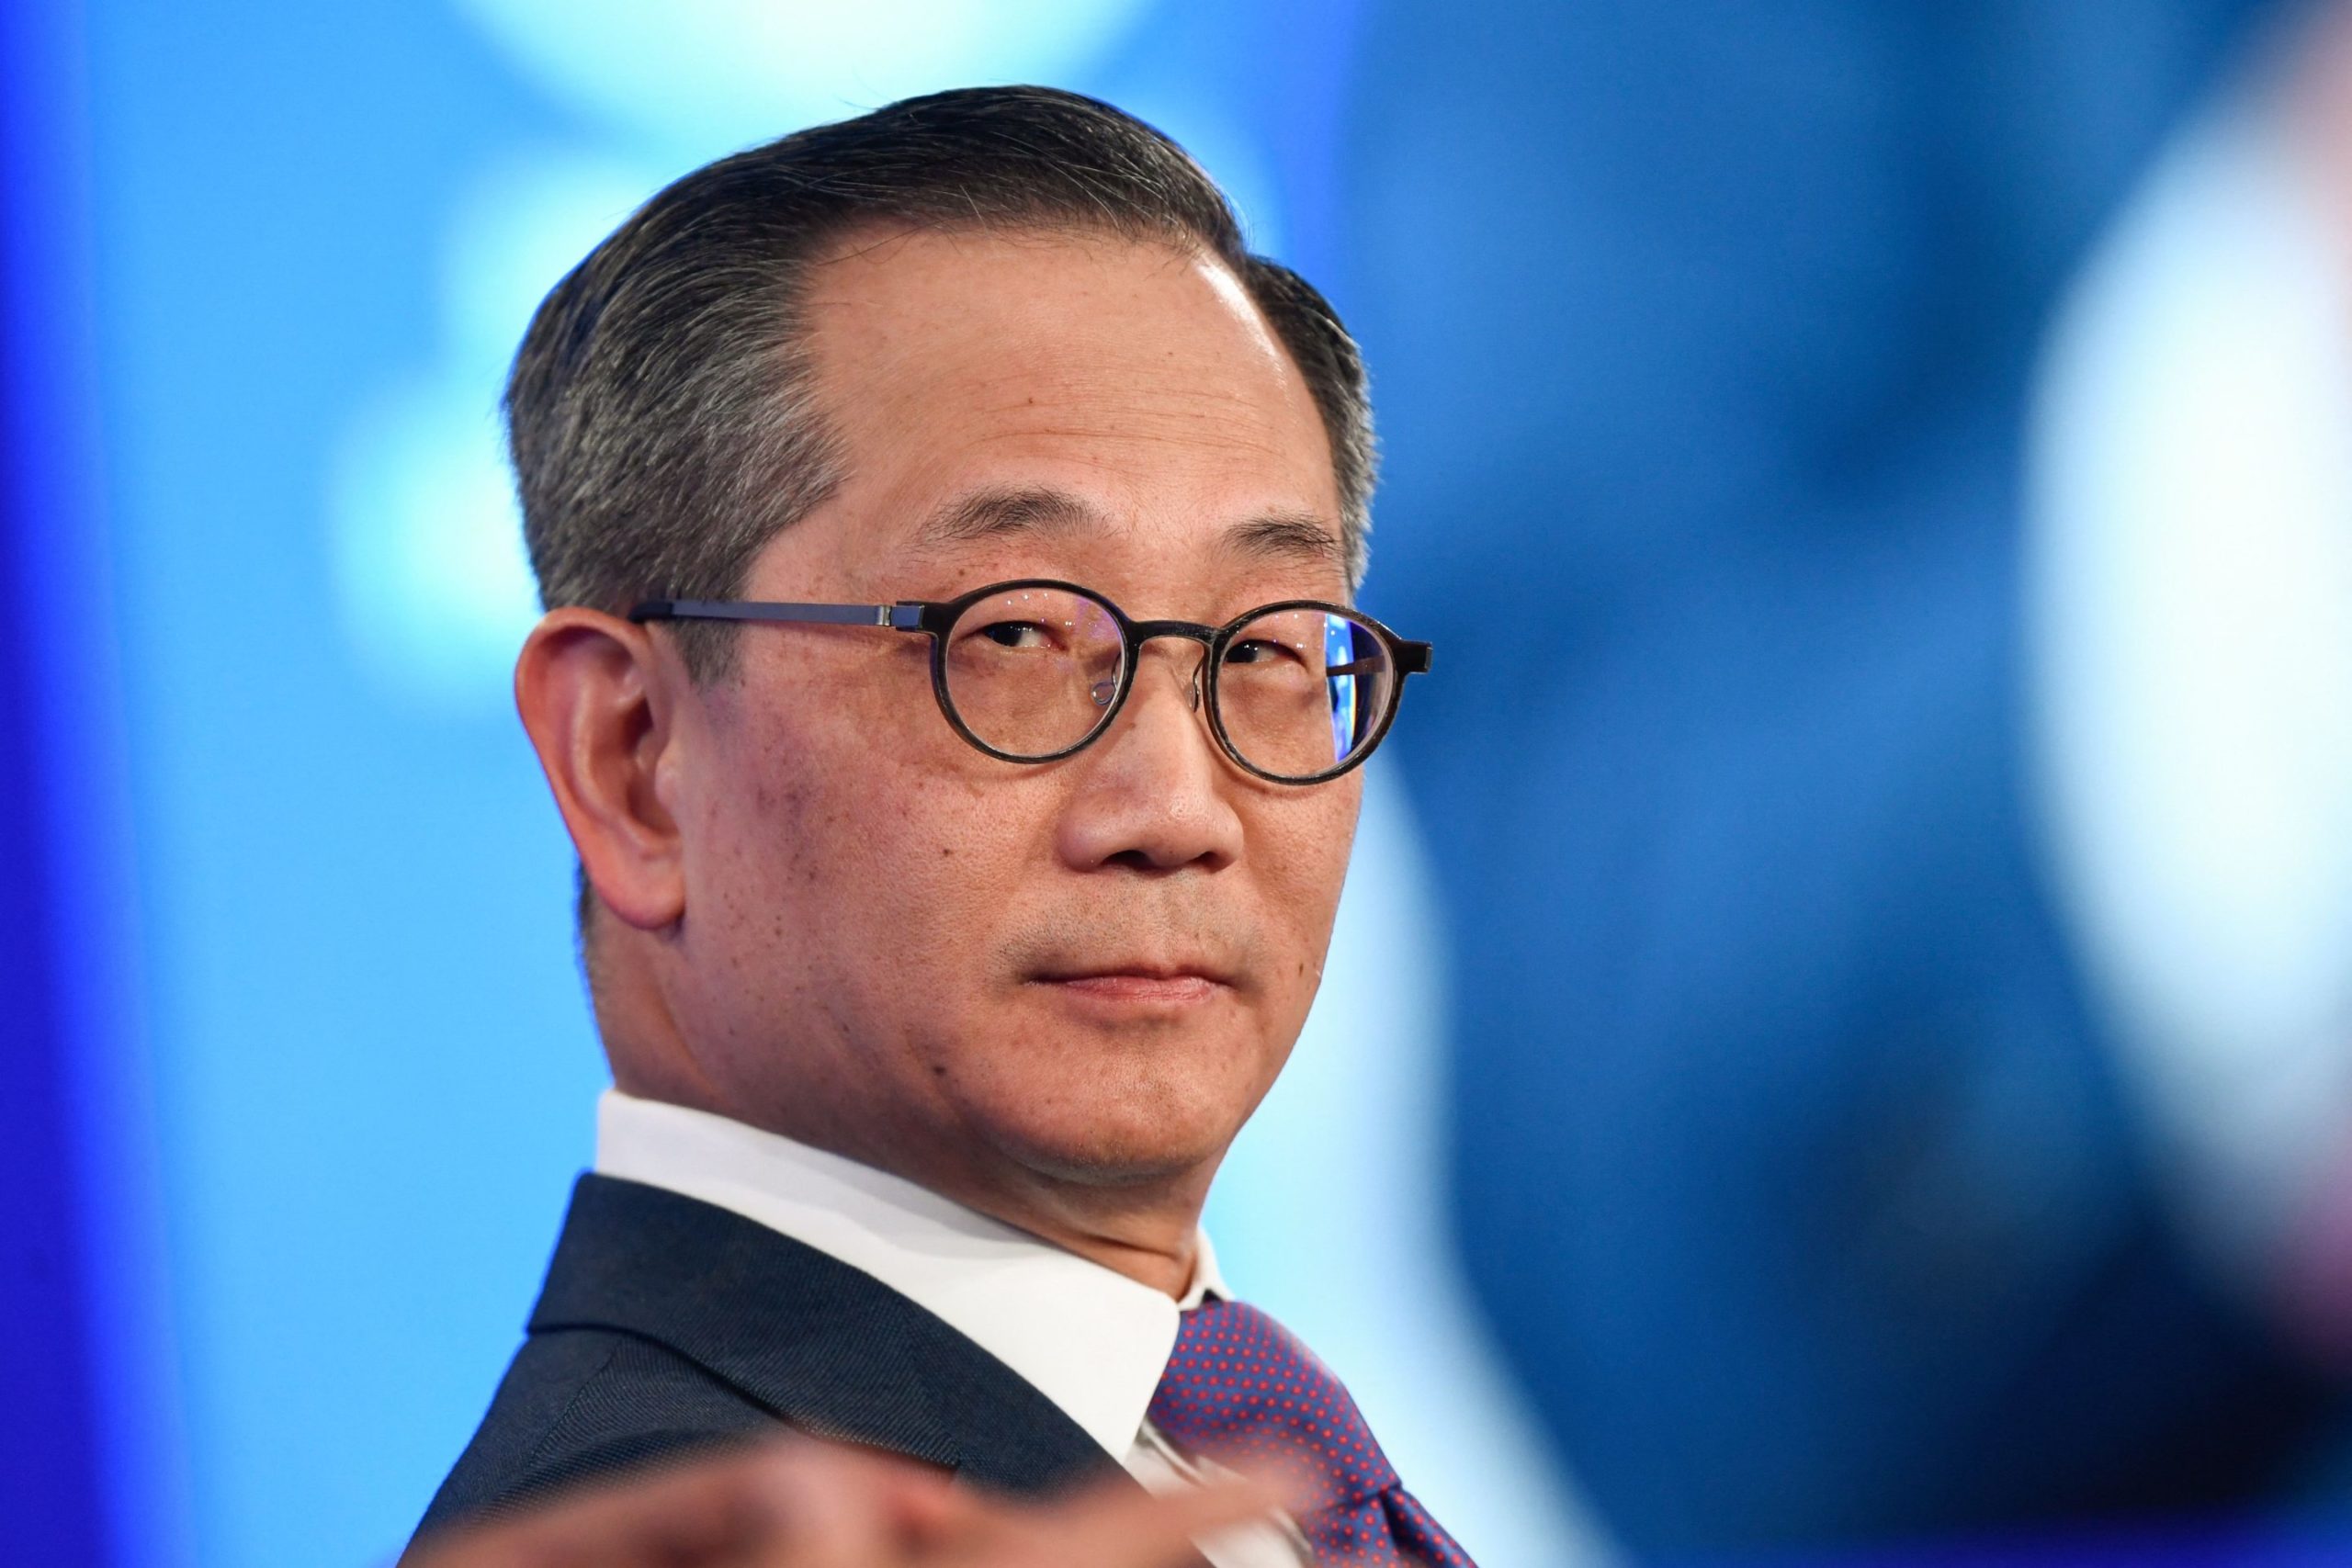 Carlyle Group CEO Kewsong Lee steps down suddenly, surprising executives